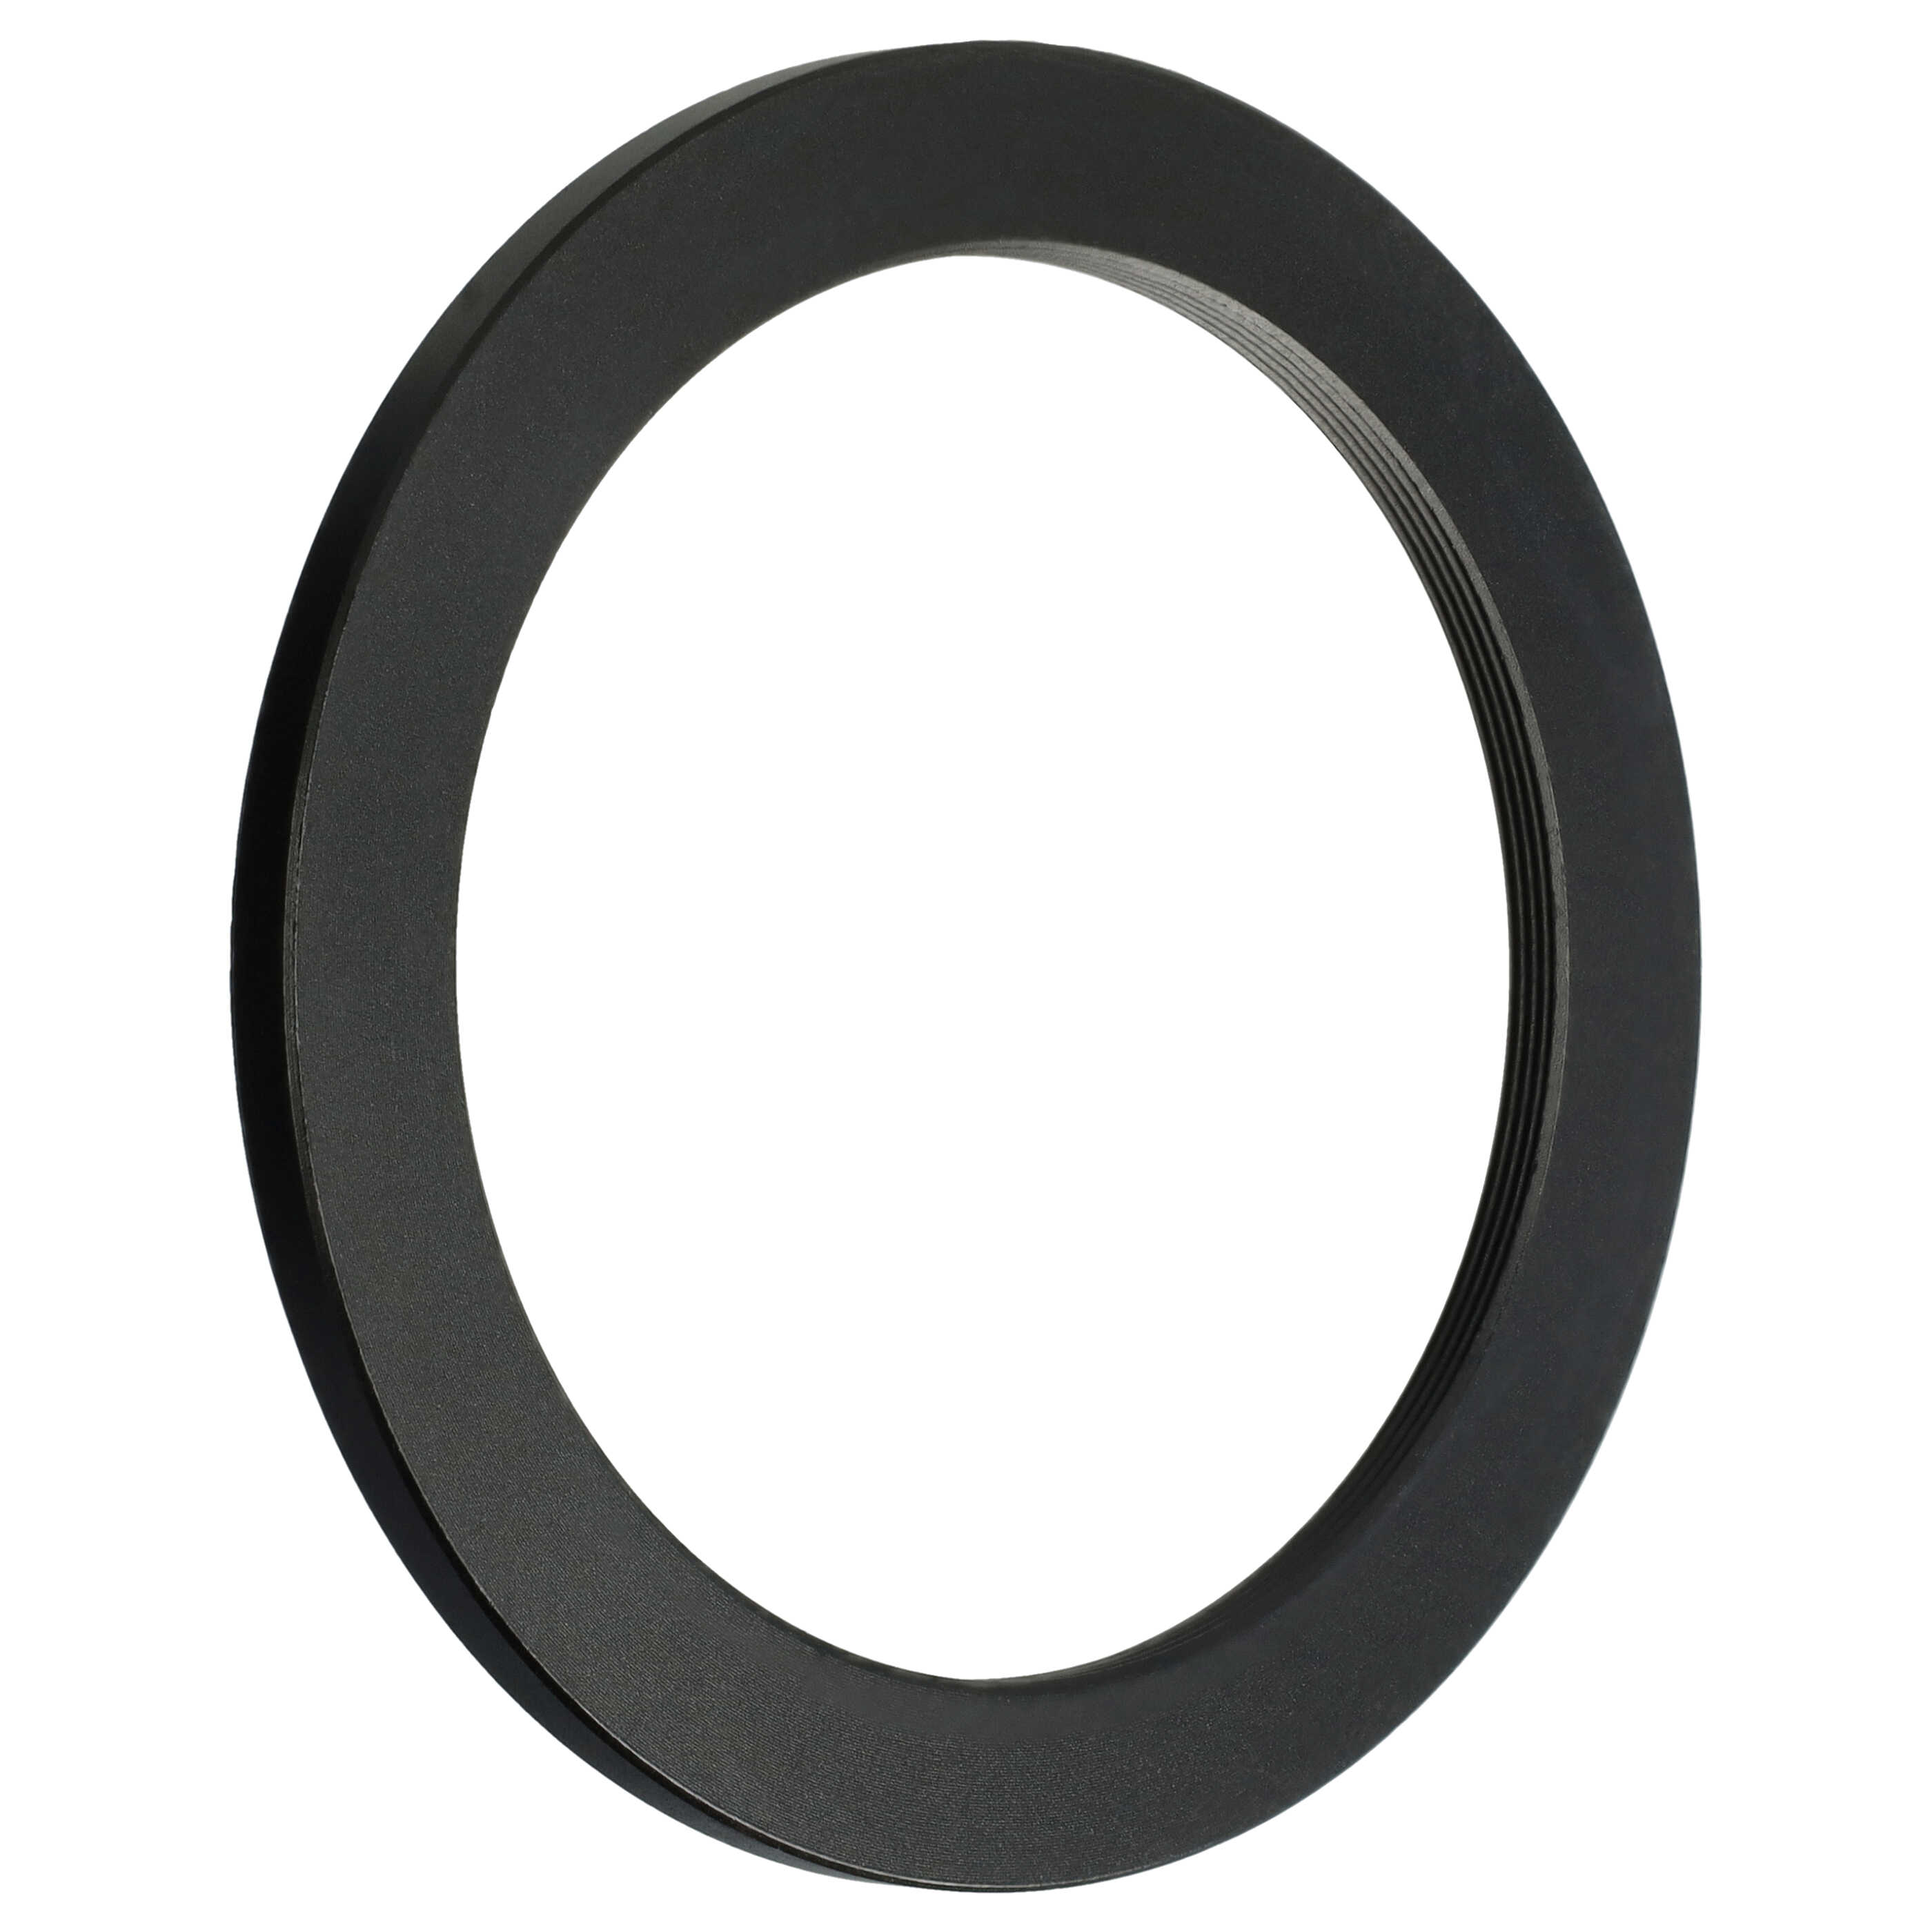 Step-Down Ring Adapter from 72 mm to 58 mm for various Camera Lenses